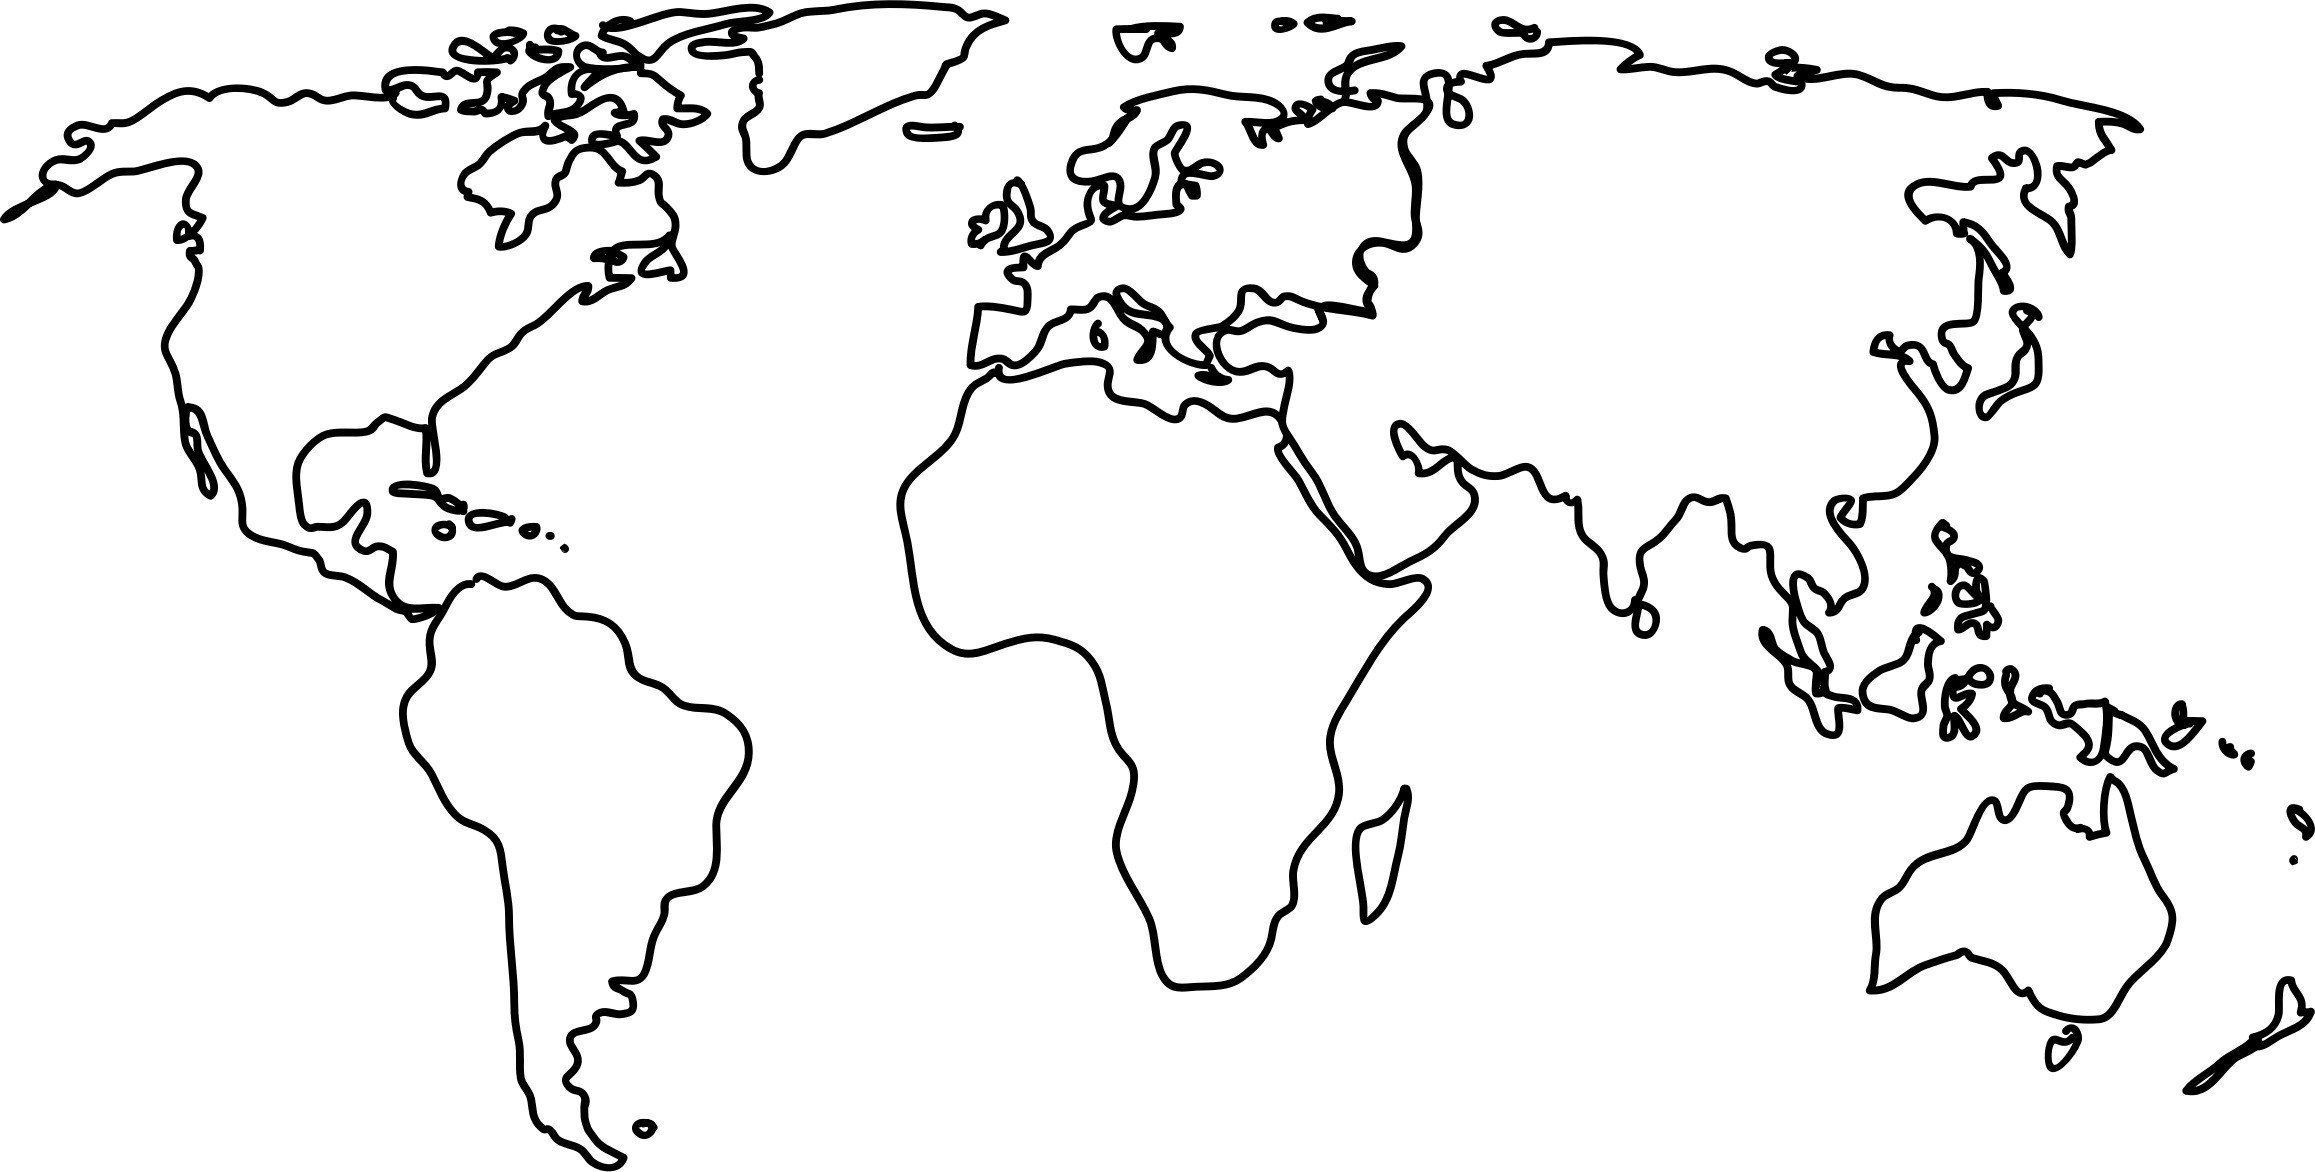 world map black and white, black and white world map. World map outline, Blank world map, World map printable